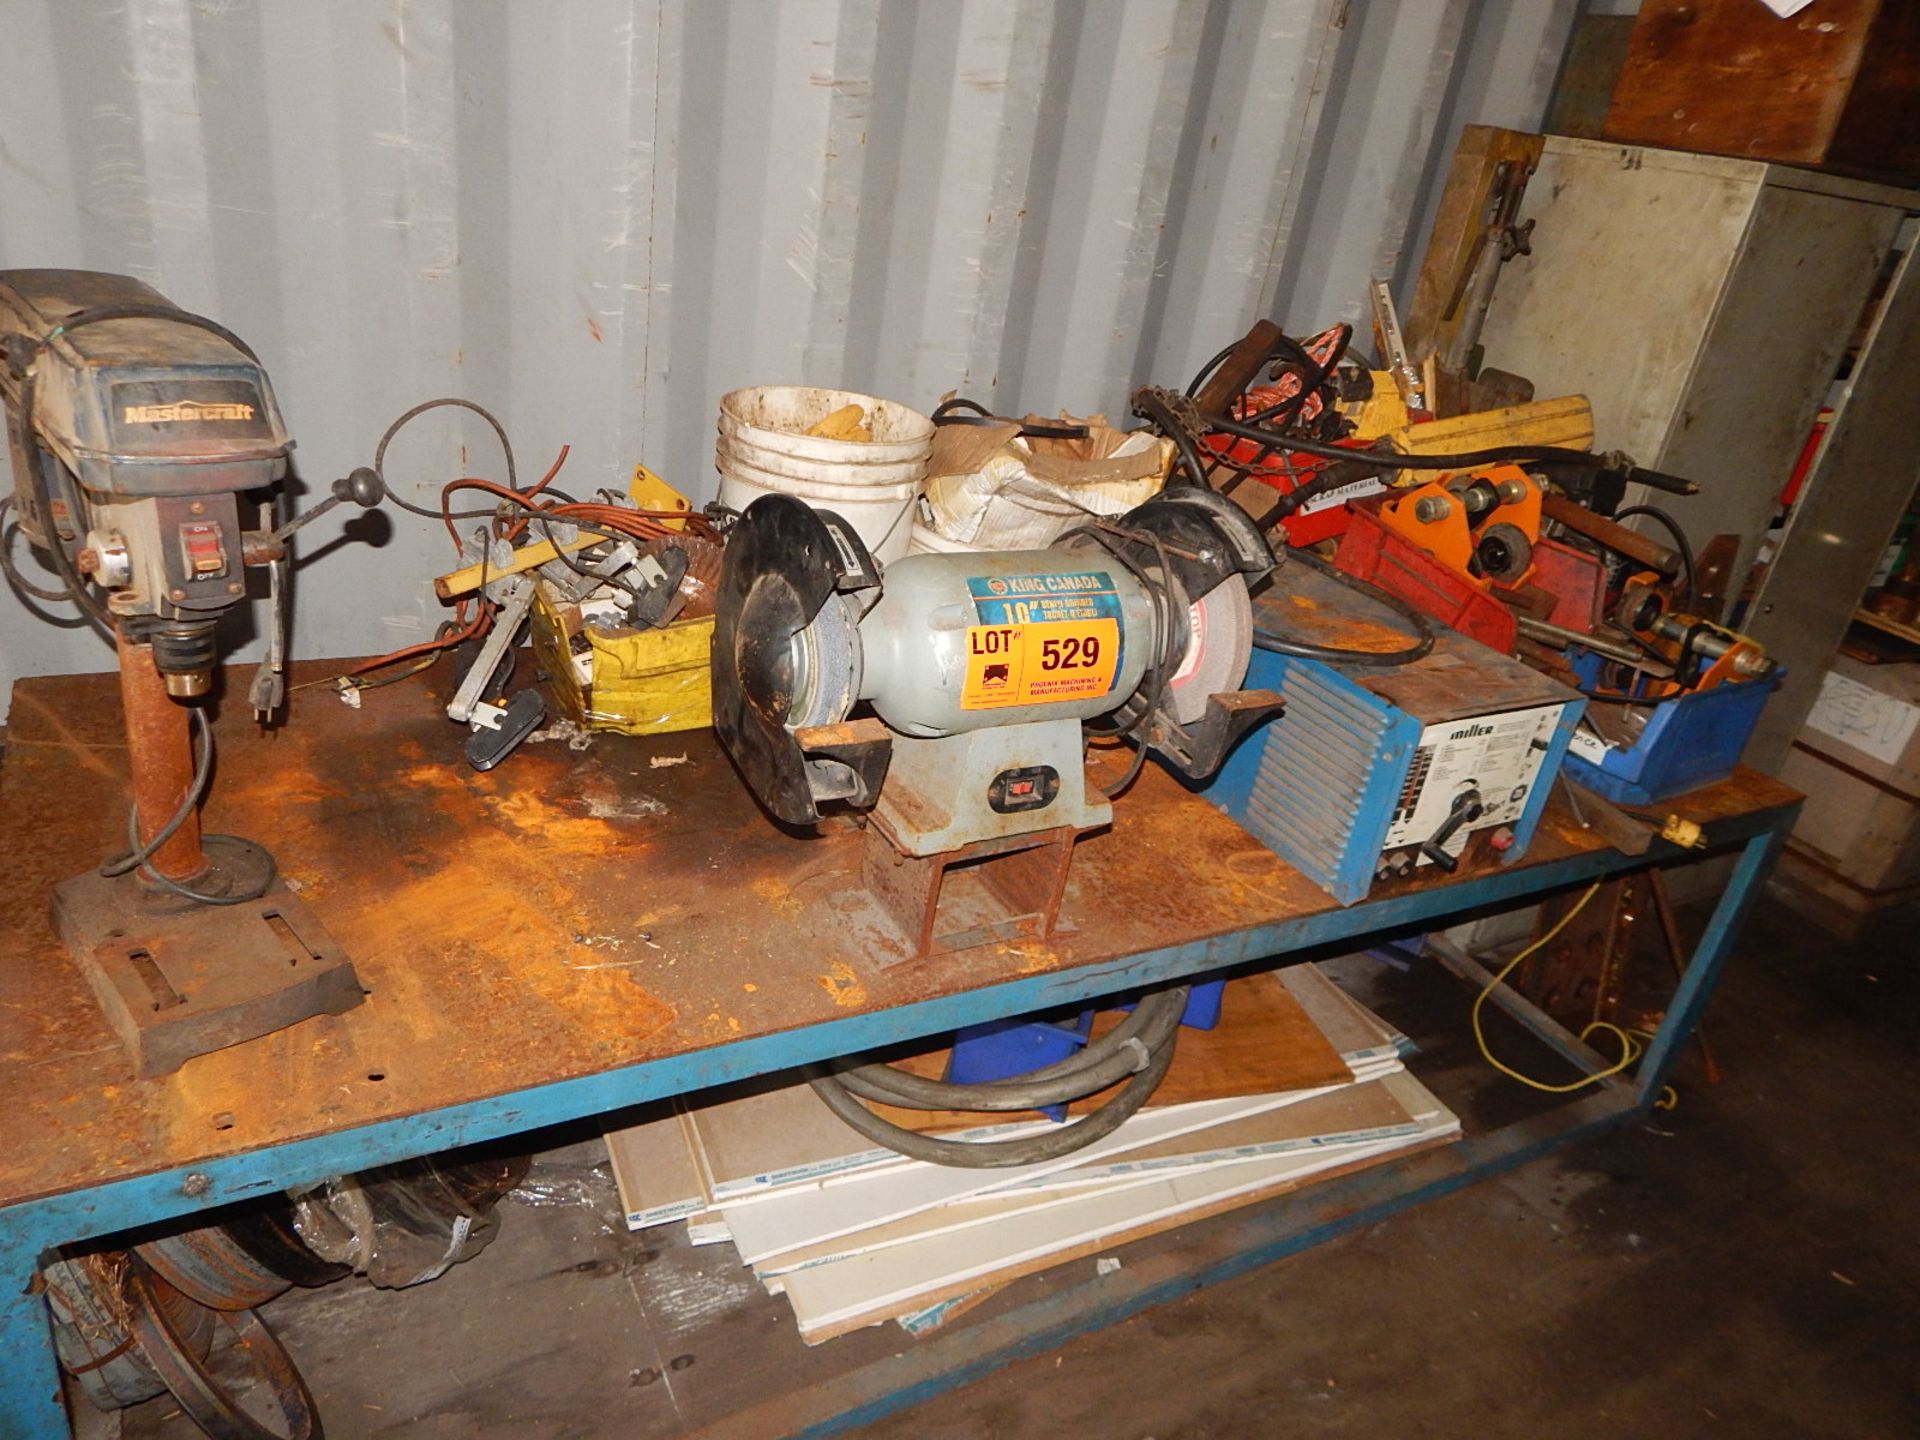 LOT/ WORK BENCH WITH CONTENTS - DRILL PRESS, DOUBLE END GRINDER, WELDING ACCESSORIES, HOIST